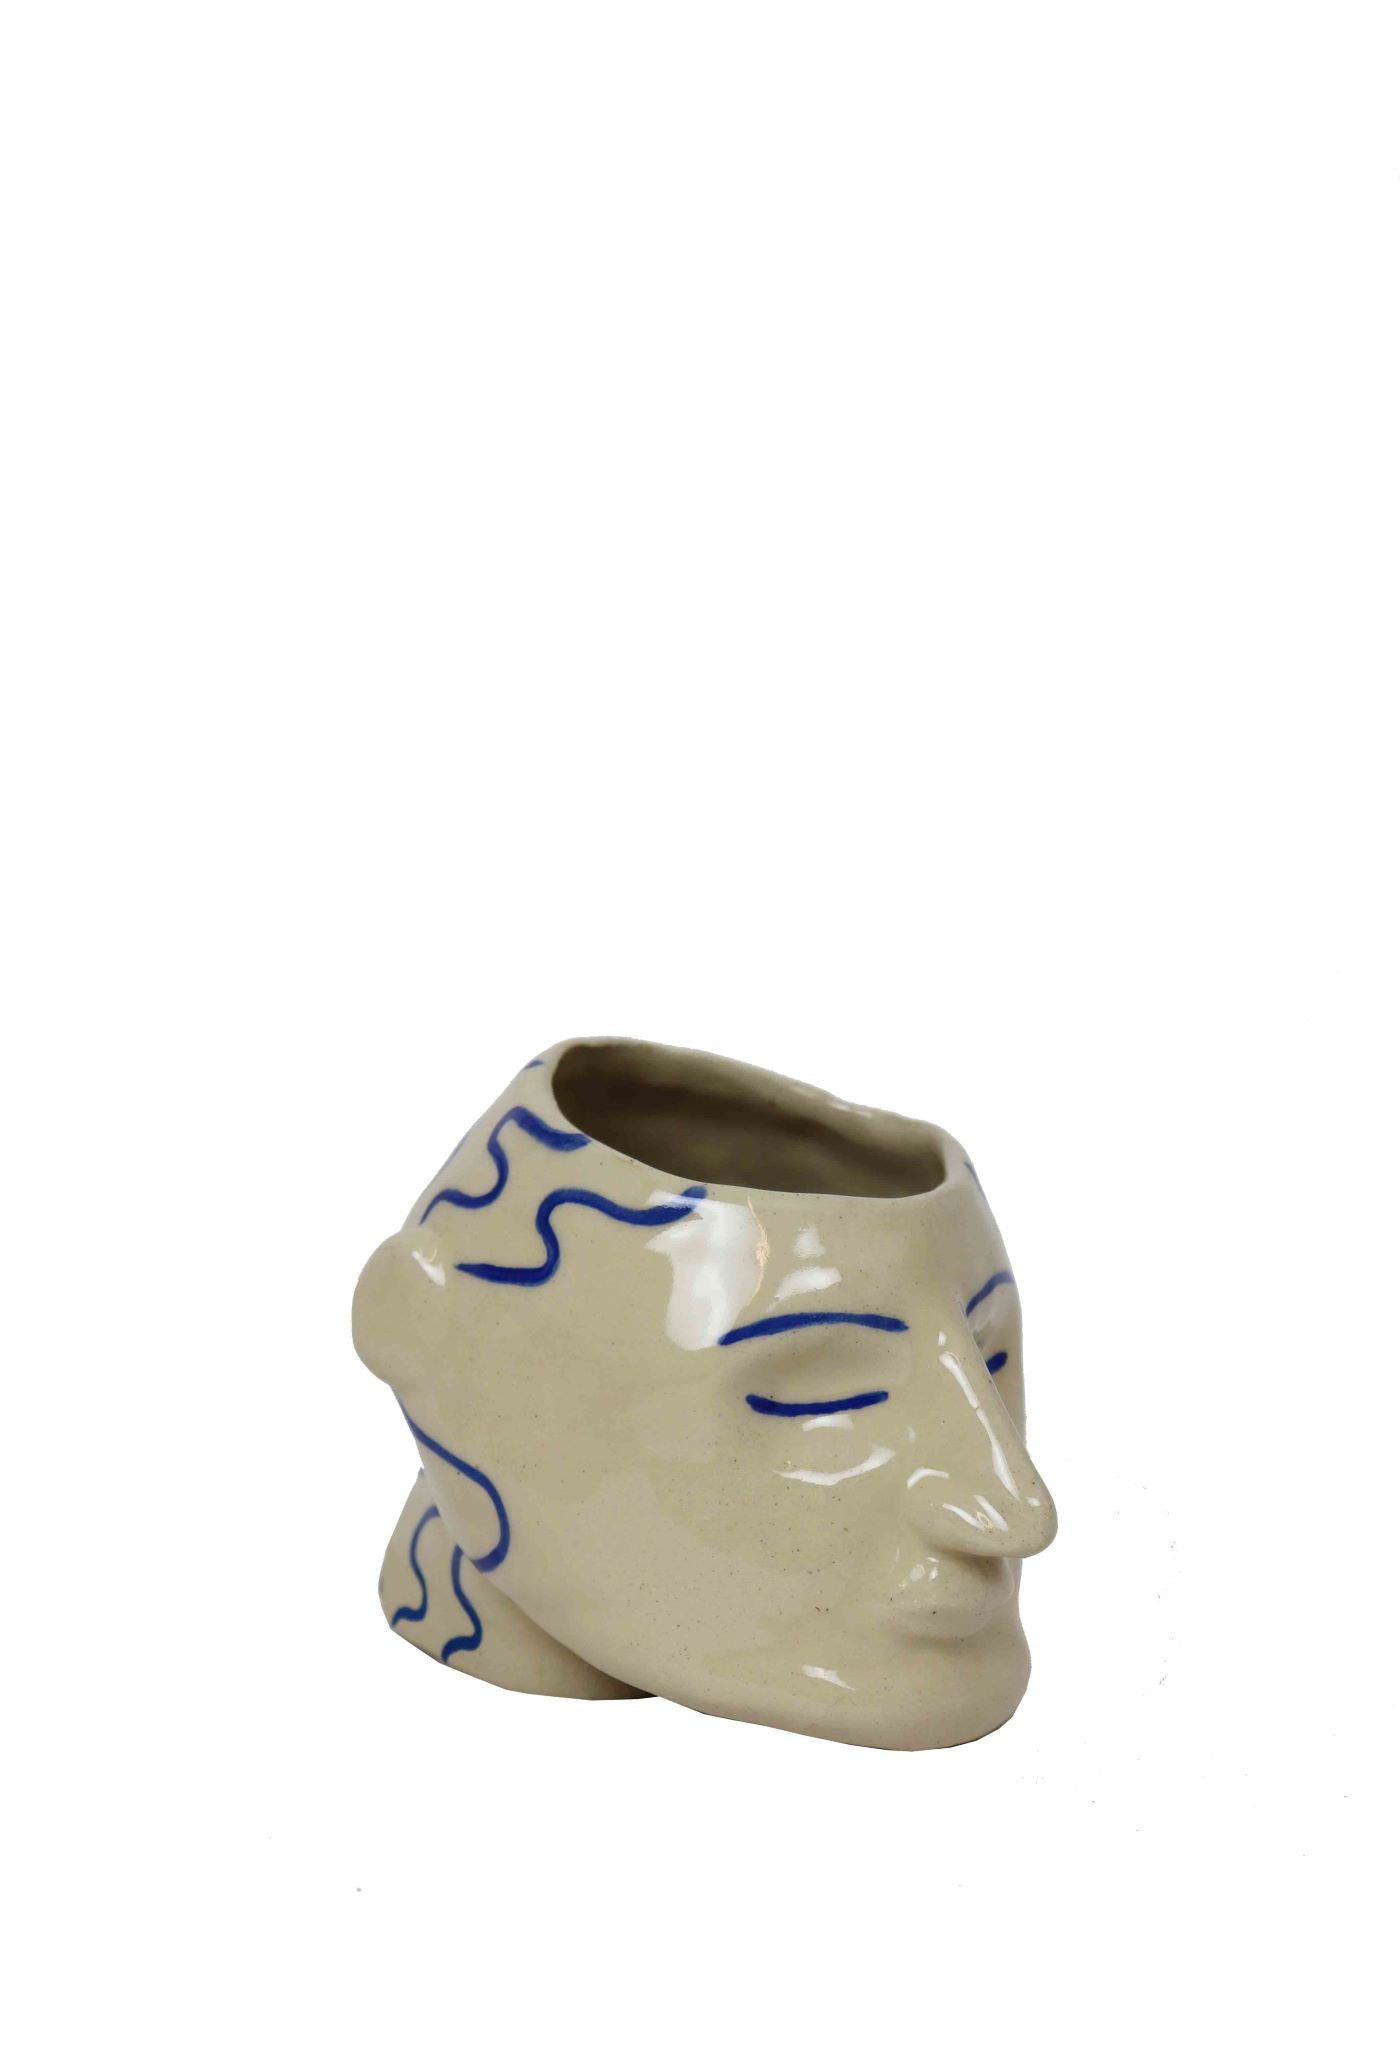 product picture of handmade head pottery planter by Sophie Alda for Cuemars